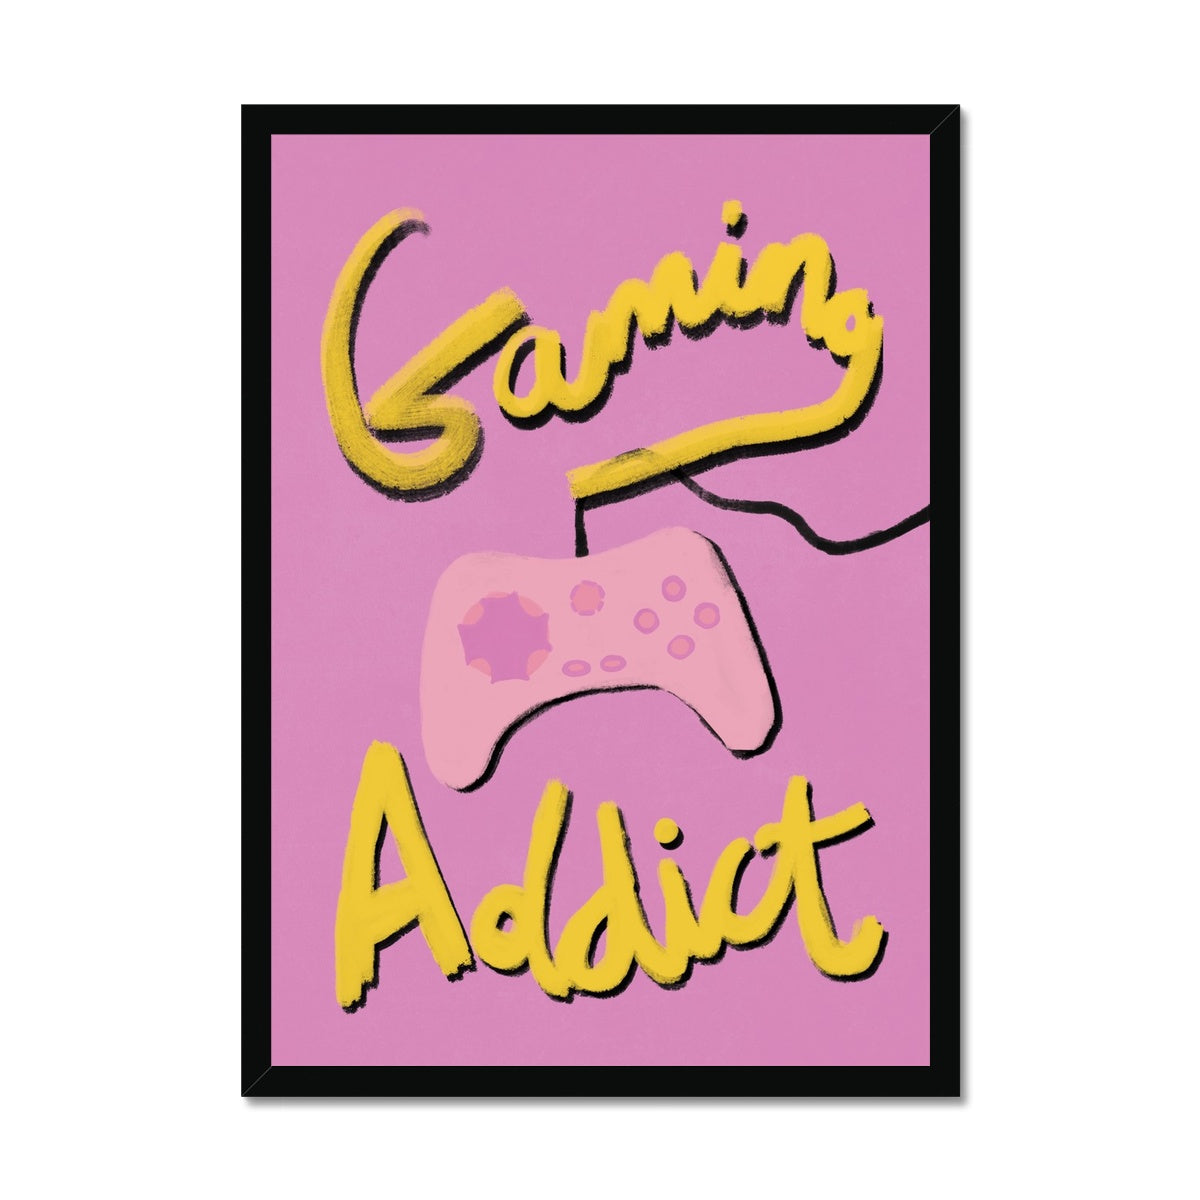 Gaming Addict - Pink, Yellow Framed Print